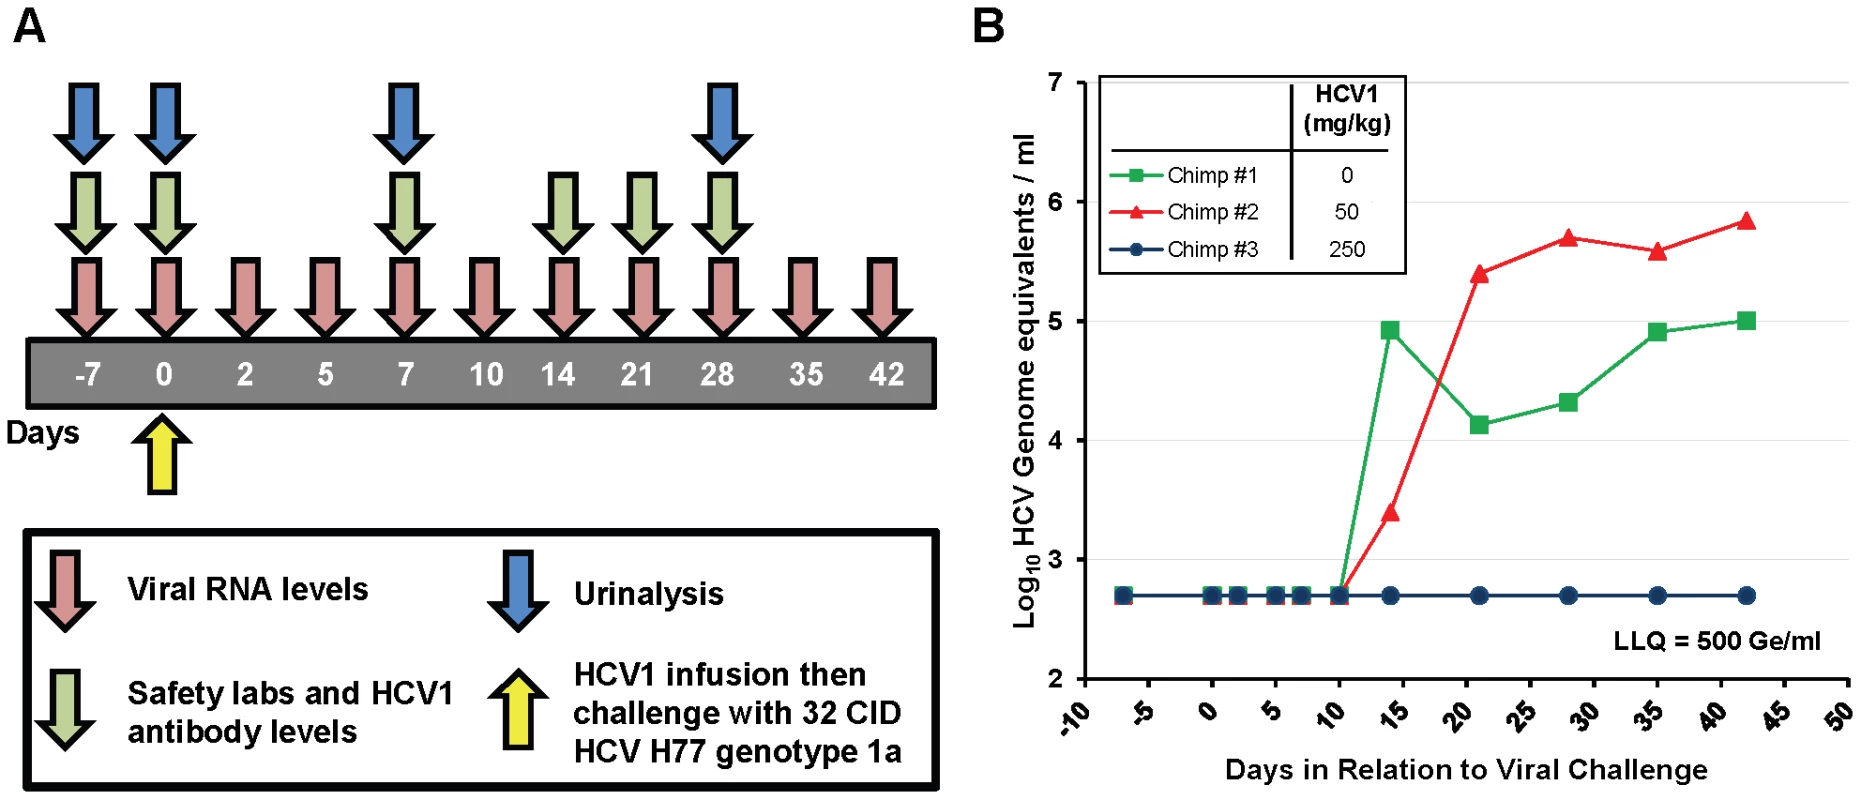 HuMAb HCV1 protects chimpanzees from initial infection with HCV.